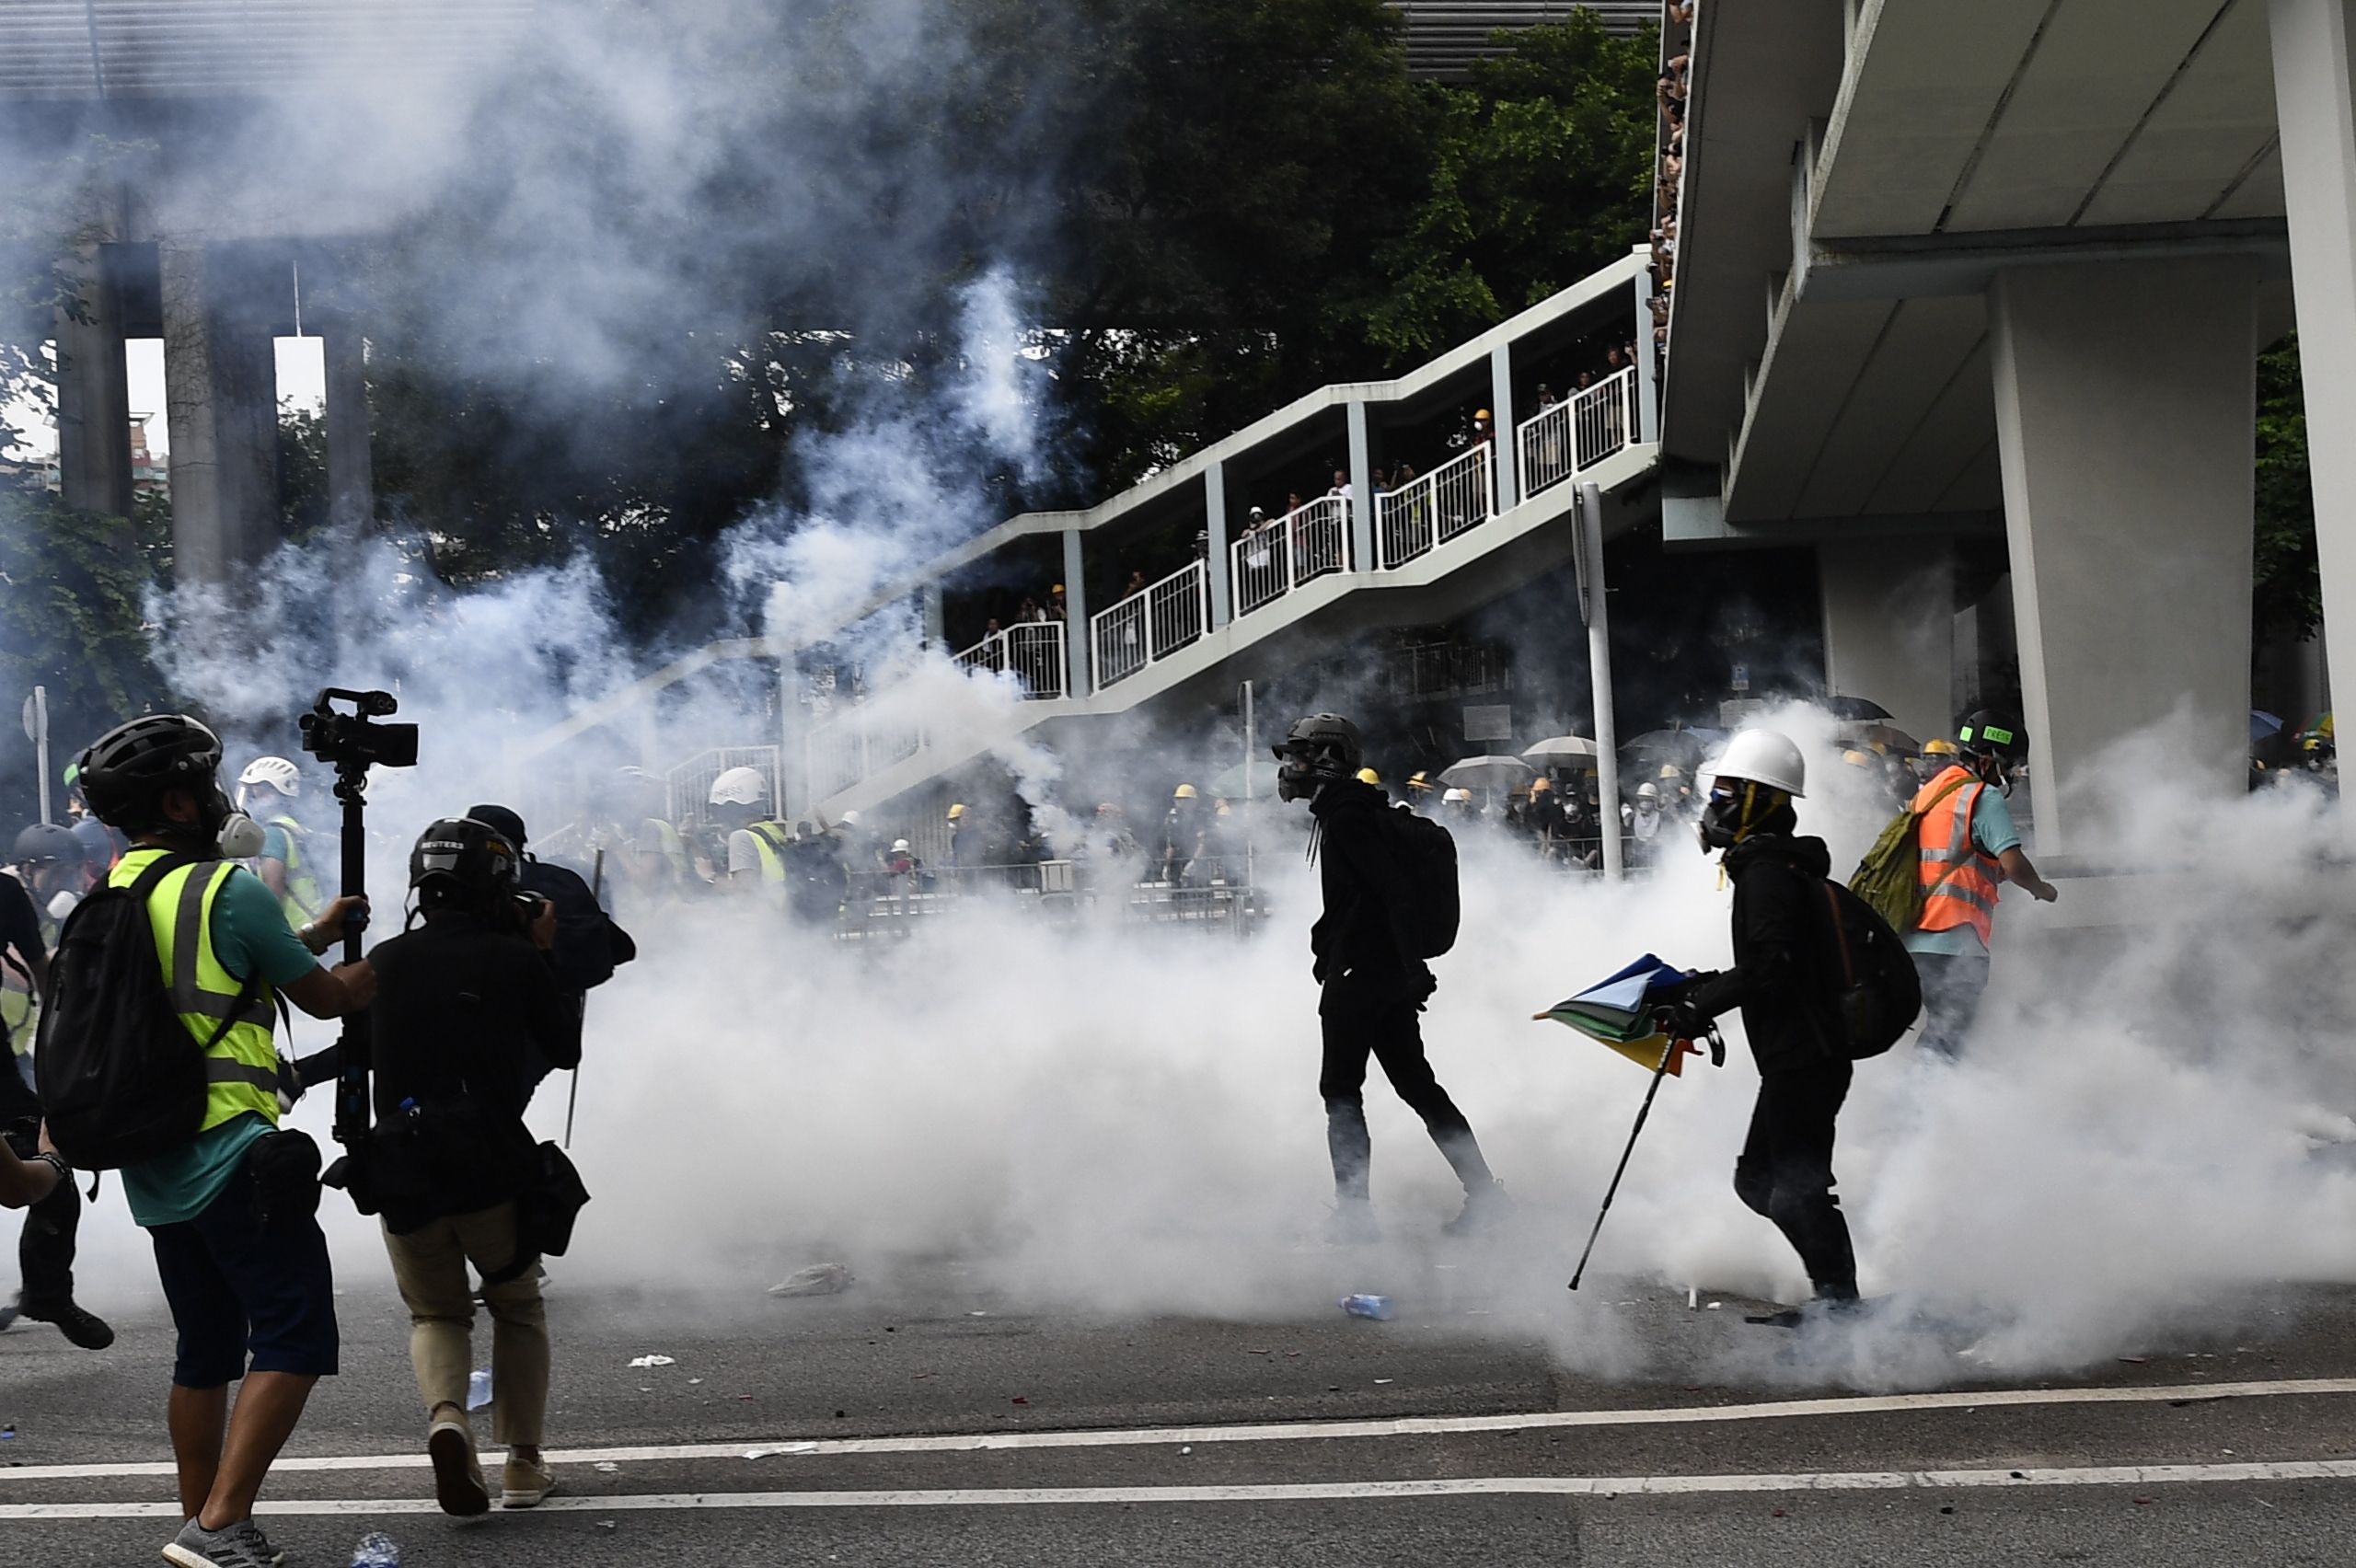 Hong Kong police fire tear gas during demonstration in the district of Yuen Long in Hong Kong on July 27.